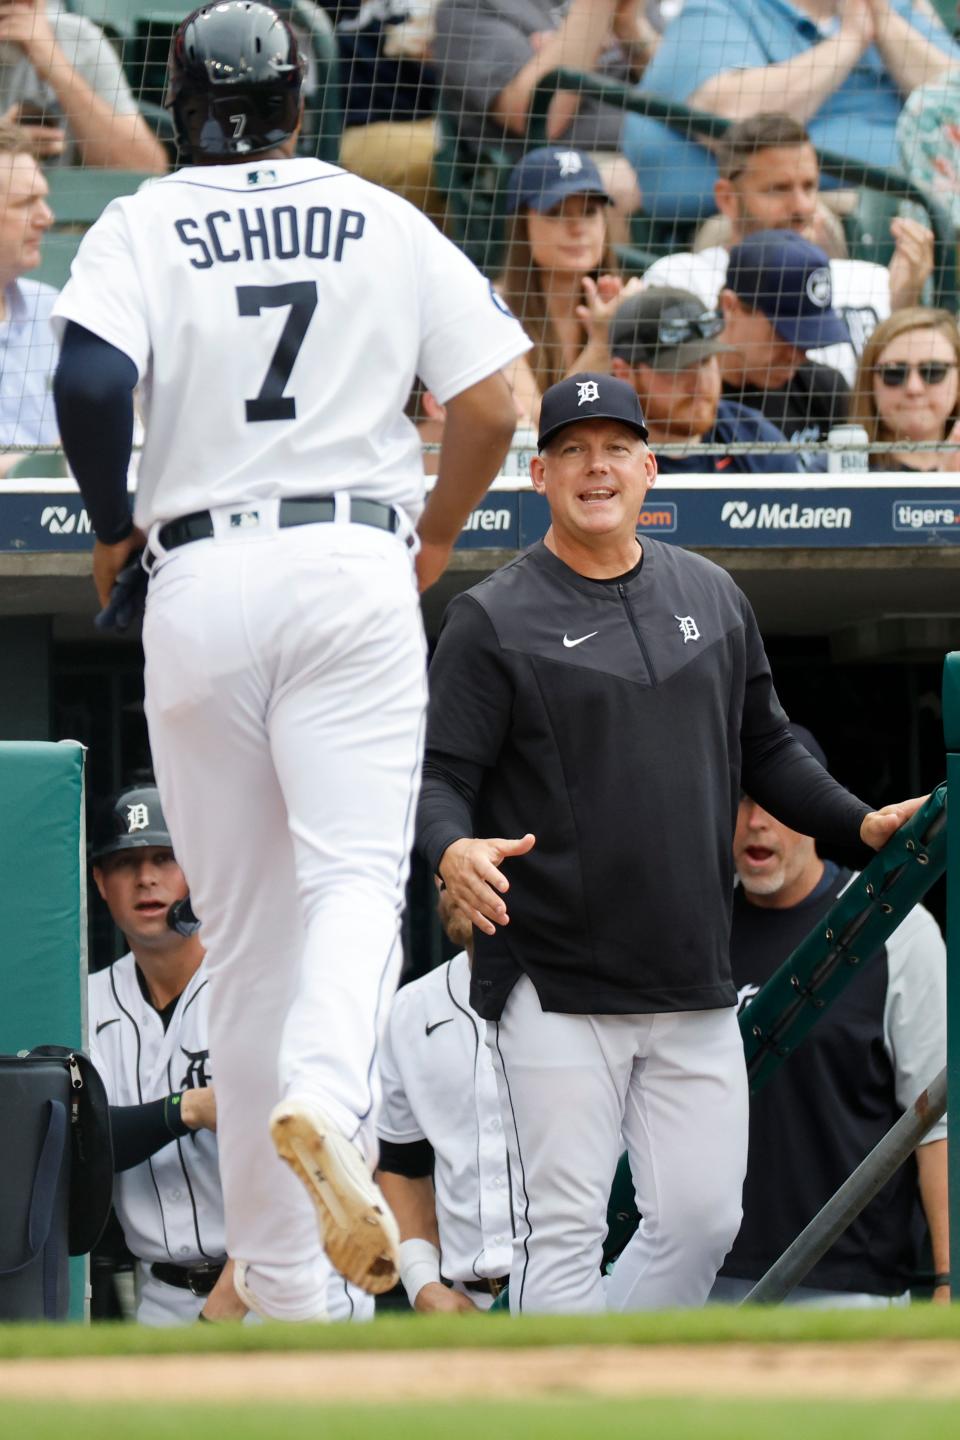 Tigers second baseman Jonathan Schoop (7) is greeted by manager A.J. Hinch after scoring in the second inning May 14, 2022 against the Orioles at Comerica Park in Detroit.